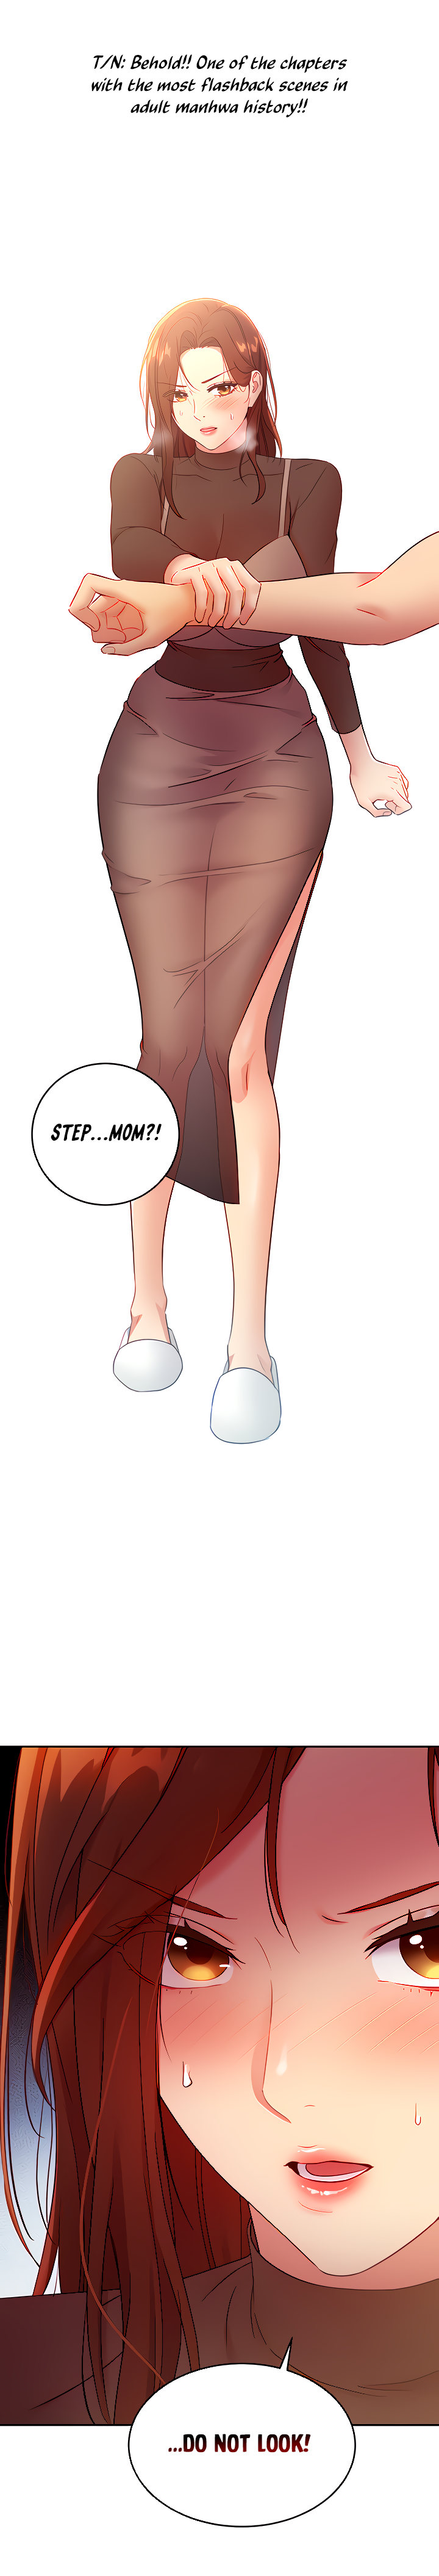 Panel Image 1 for chapter 85 of manhwa Stepmother